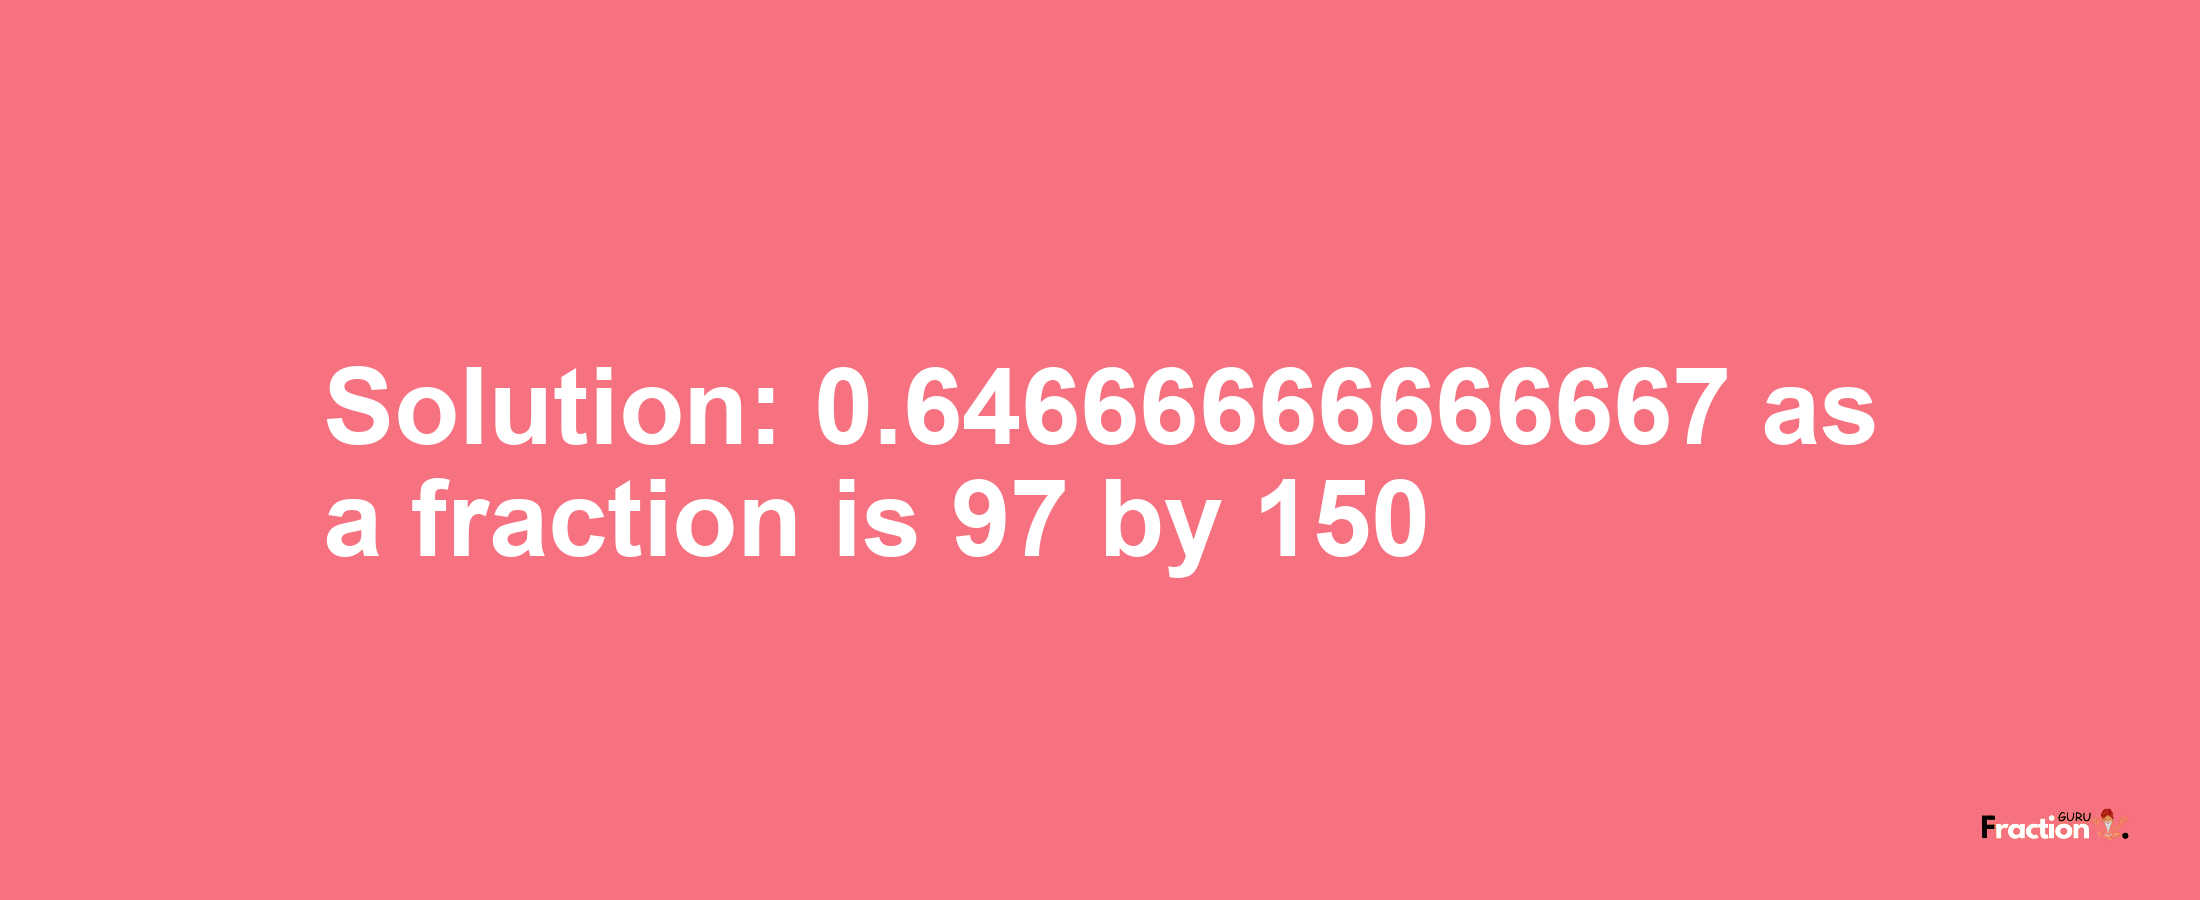 Solution:0.64666666666667 as a fraction is 97/150